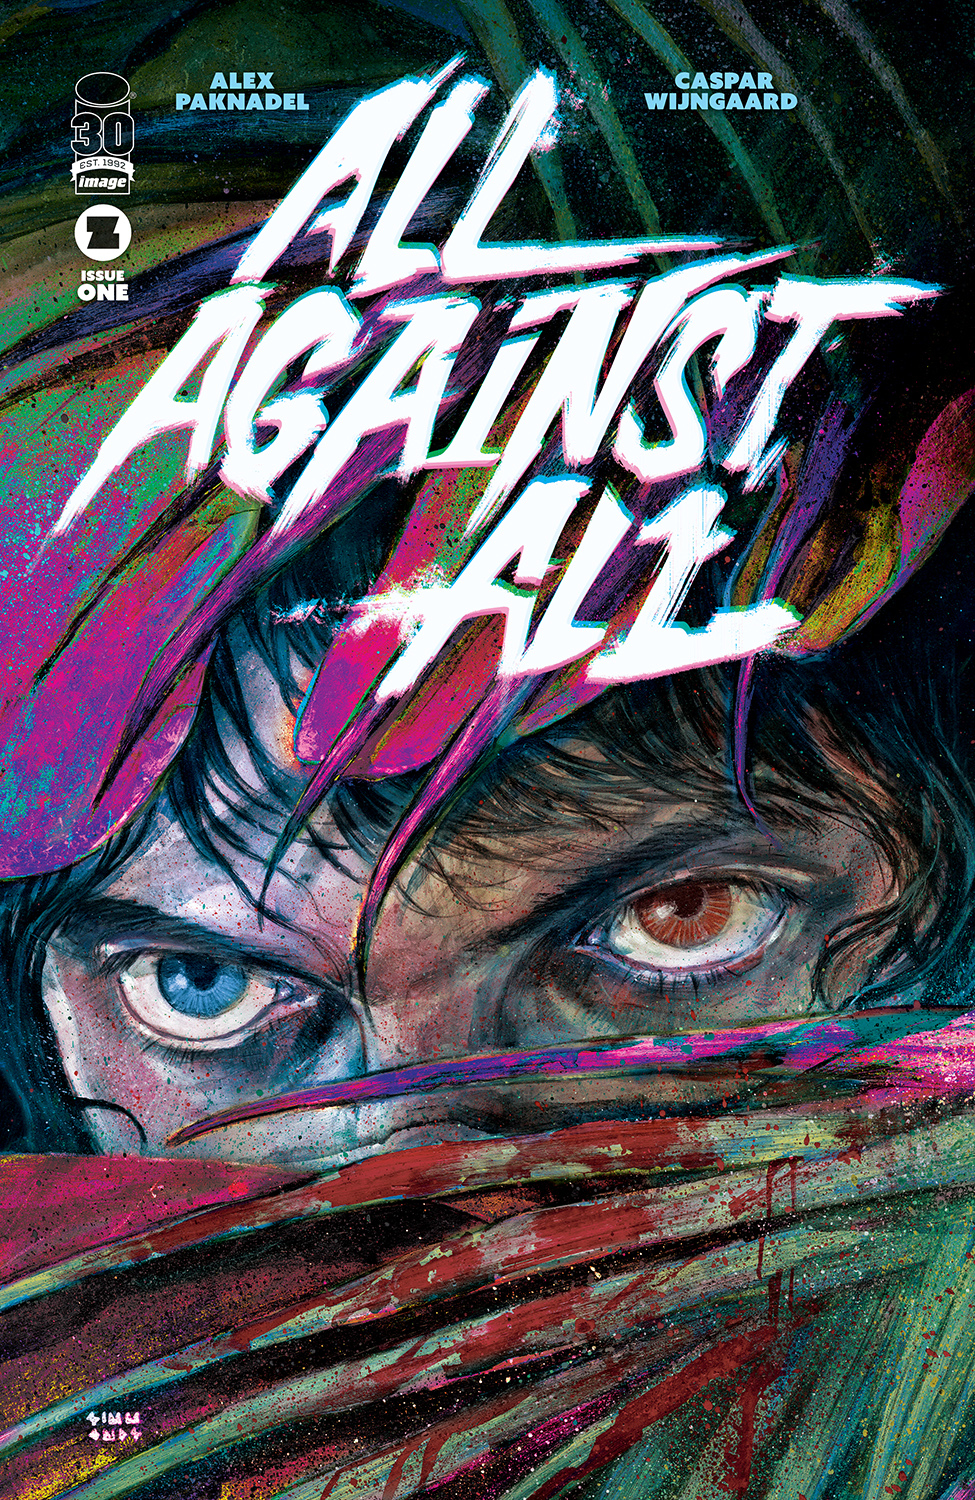 All Against All #1 Cover C 1 for 25 Incentive Simmonds (Of 5)